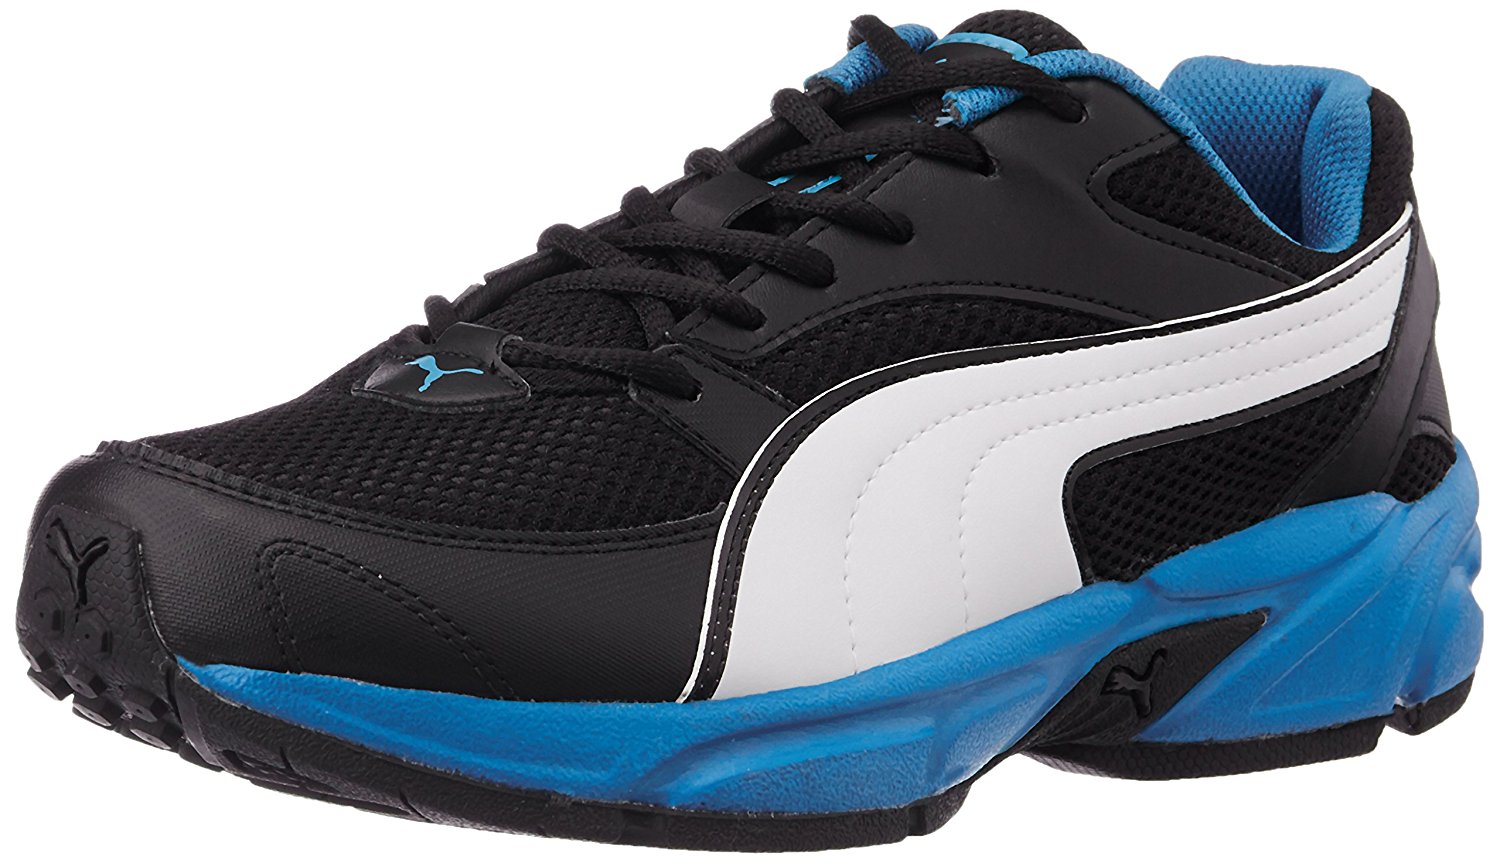 Buy PUMA Men's Black Running Shoes Online @ ₹2699 from ShopClues